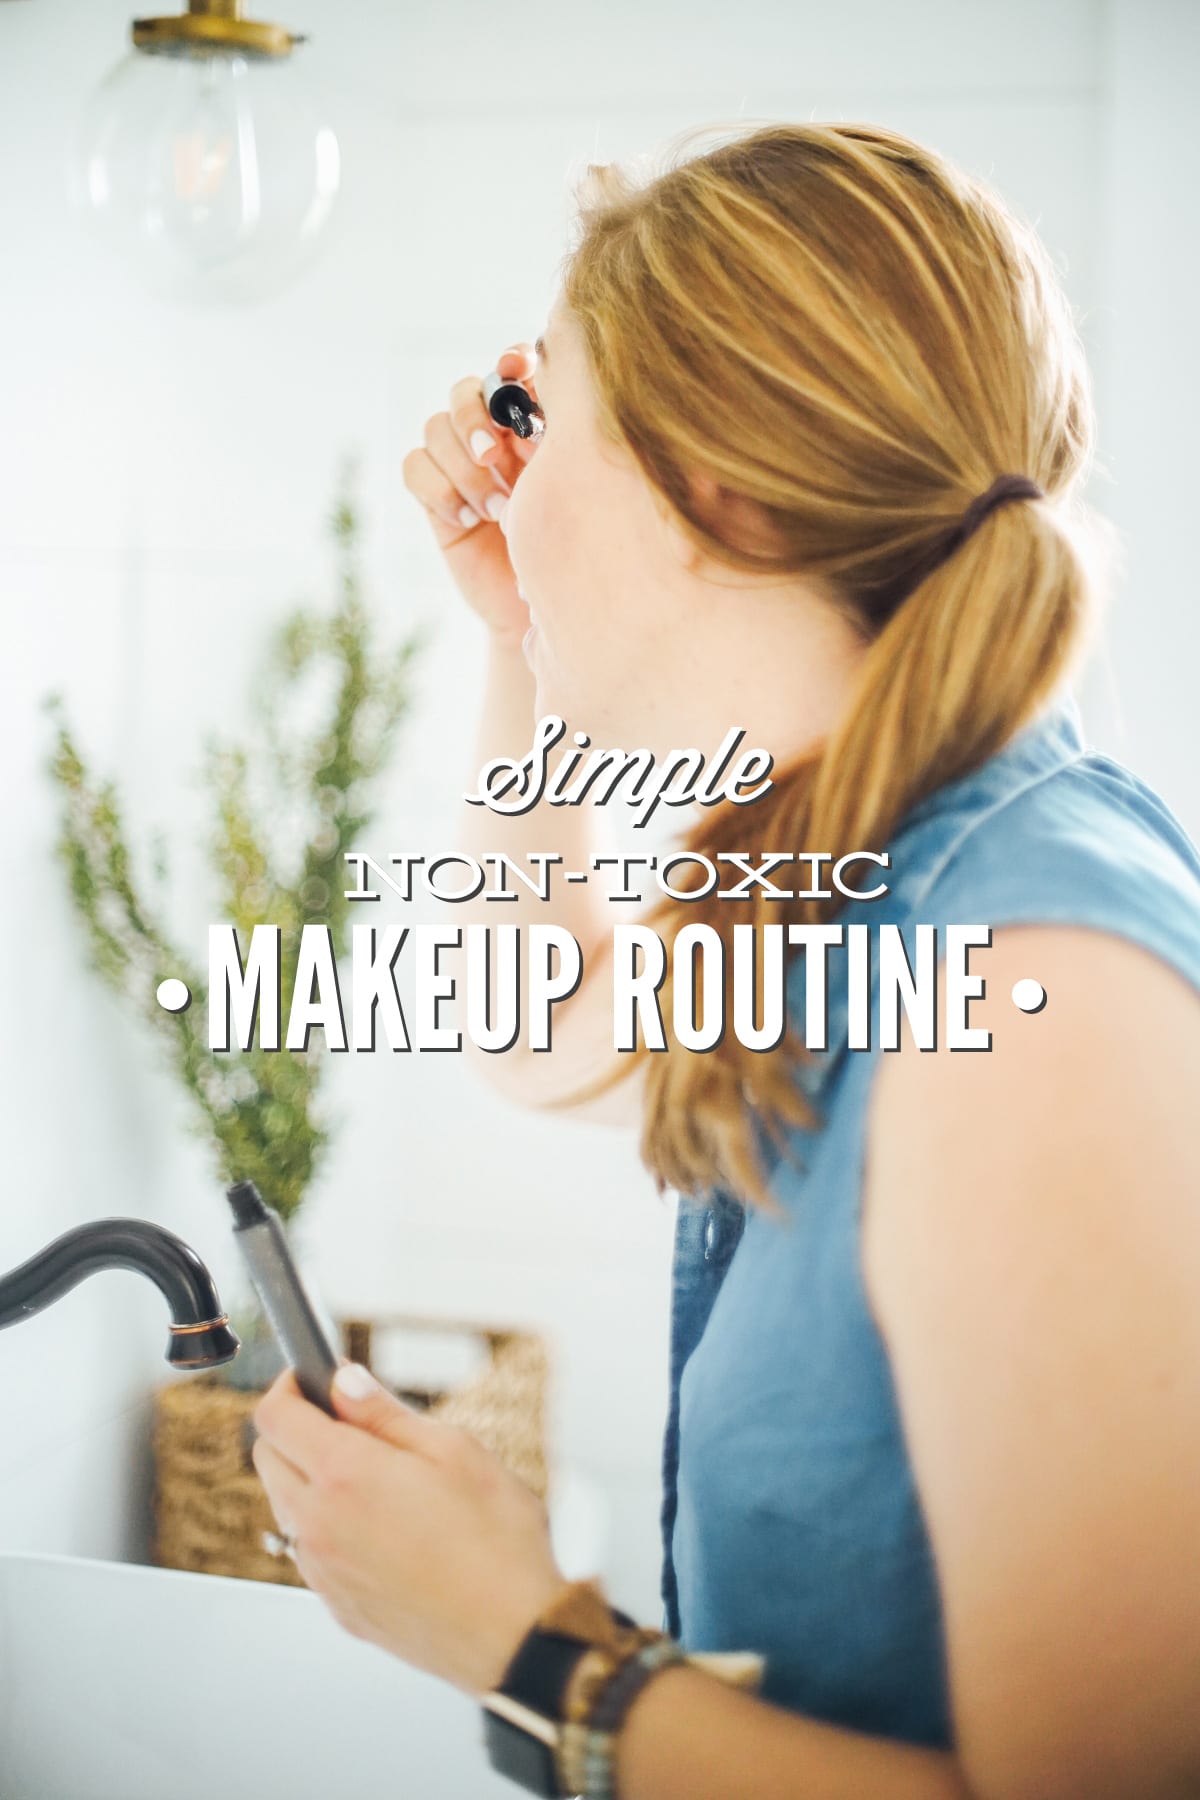 My Simple Non-Toxic Makeup Routine (Using Non-Toxic, Easy-to-Find Makeup)